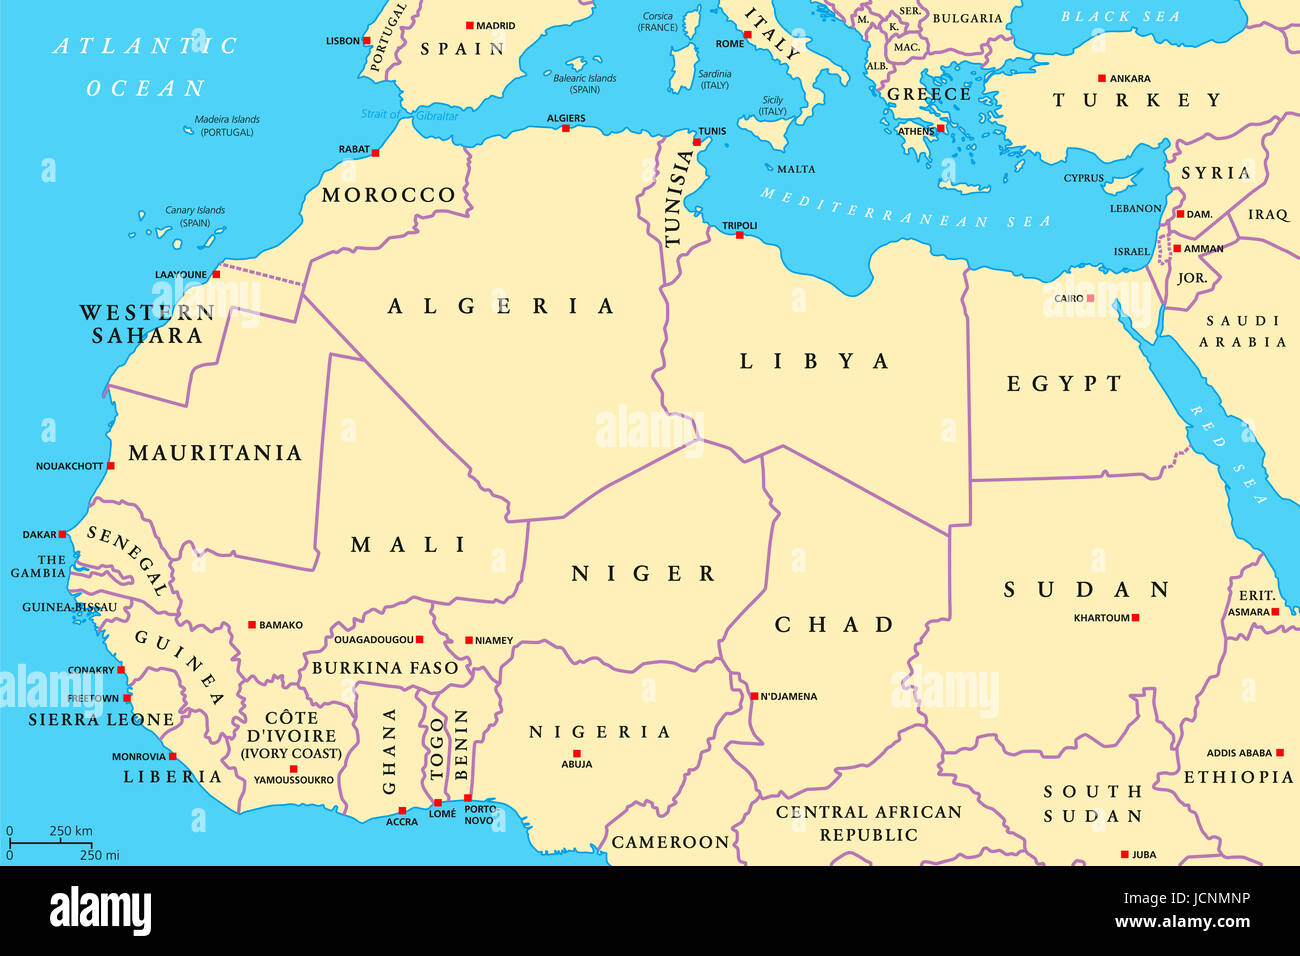 North Africa countries political map with capitals and borders. From